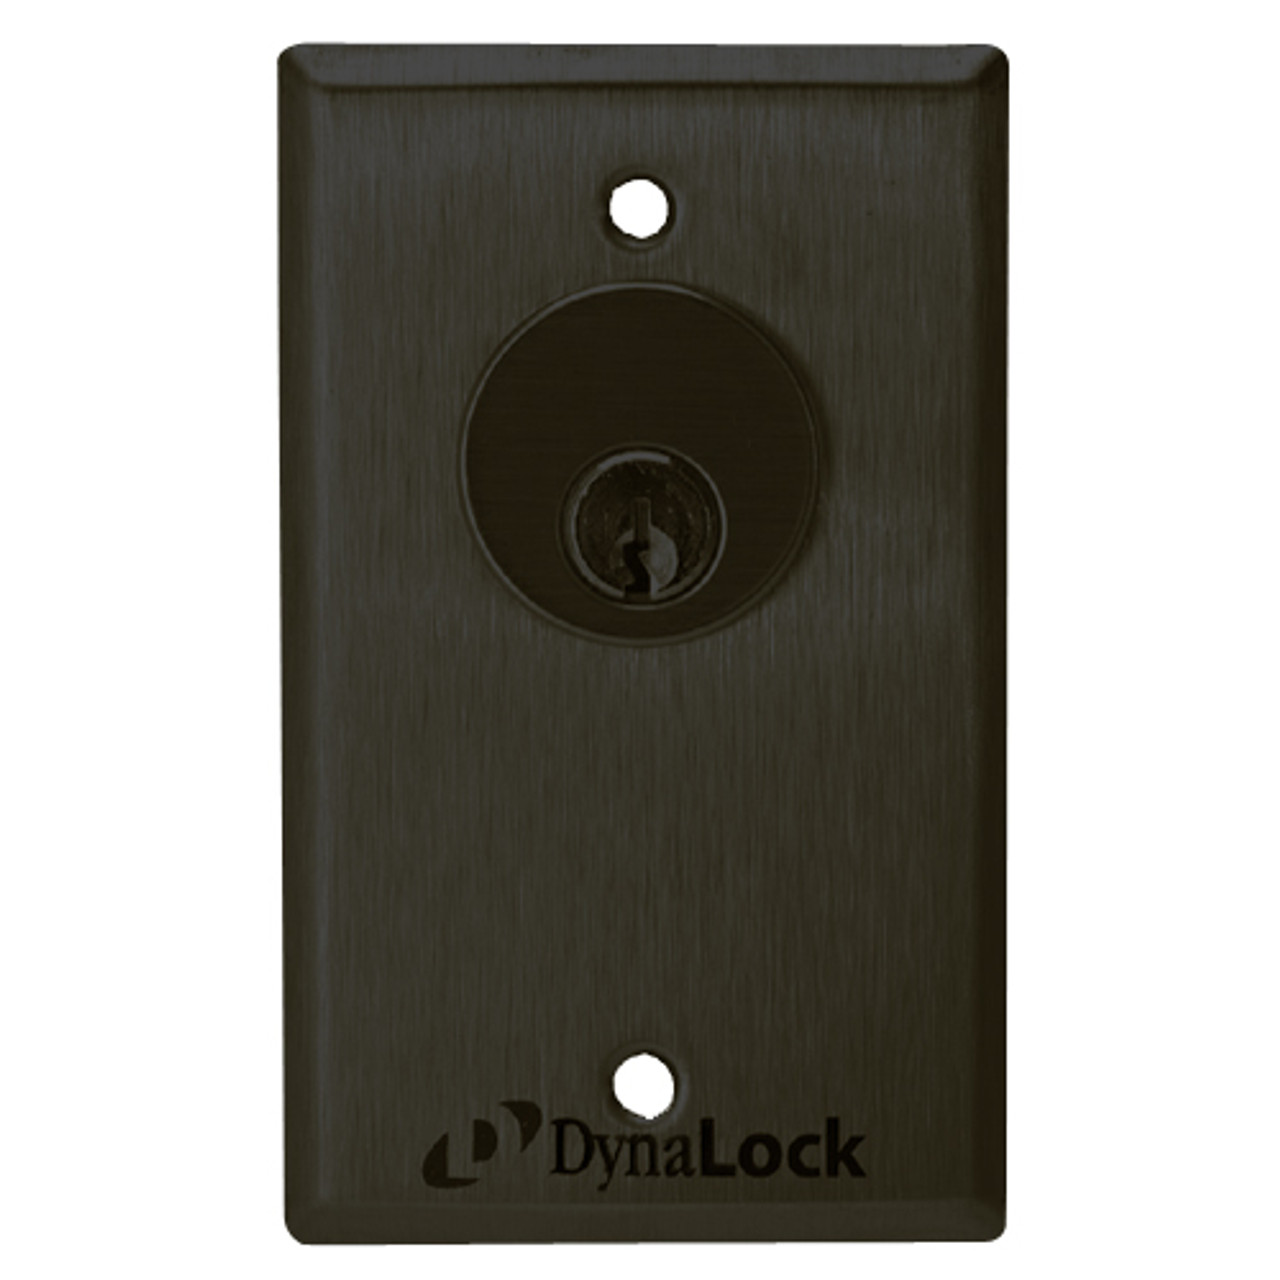 7001-US10B-CYL DynaLock 7000 Series Keyswitches Maintained 1 Single Pole Double Throw with Mortise Cylinder in Oil Rubbed Bronze